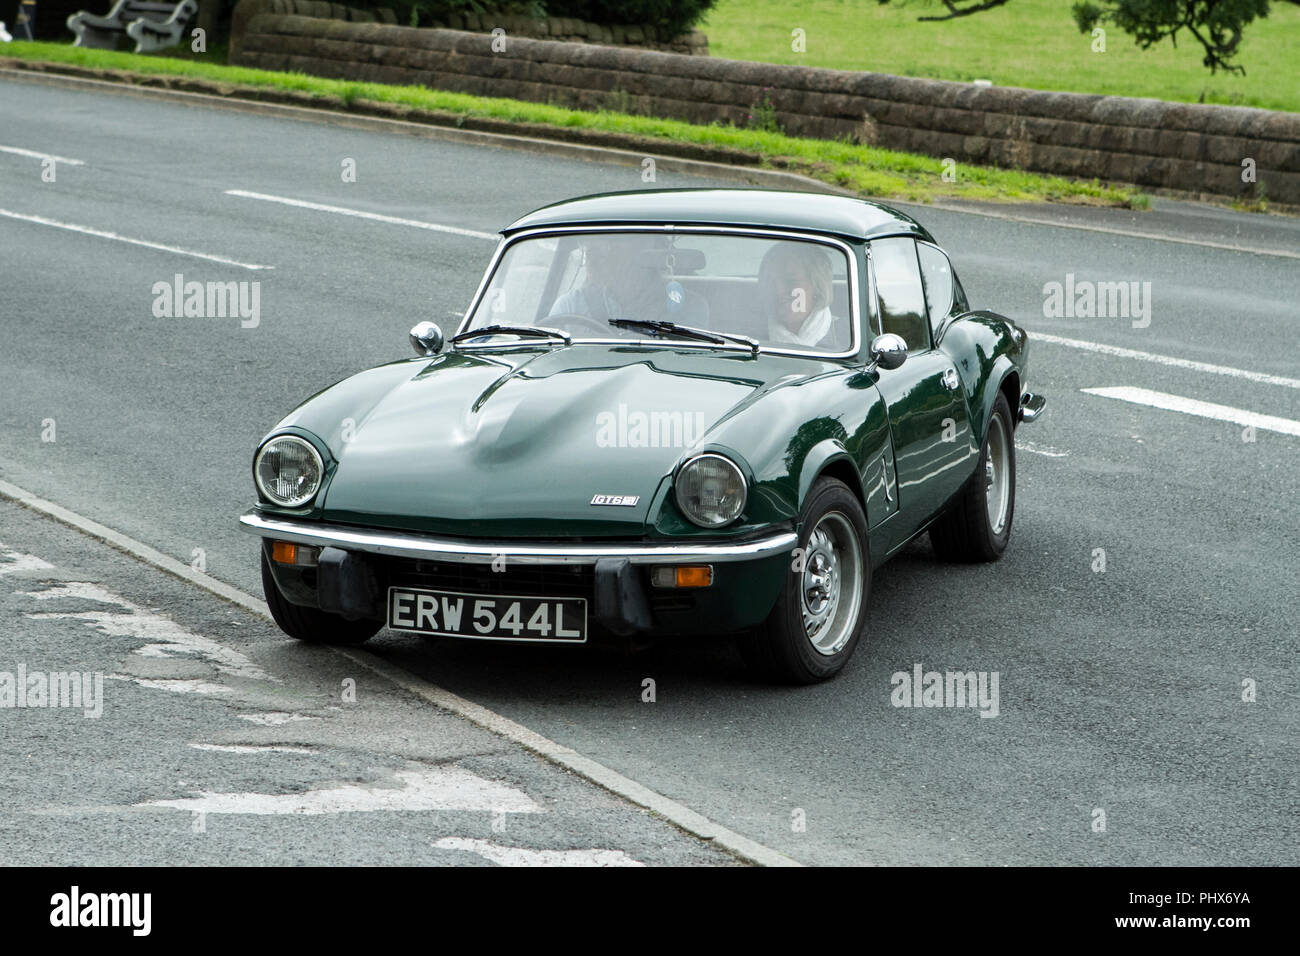 Green Triumph GT6 at Hoghton towers annual classic vintage car rally, UK Stock Photo